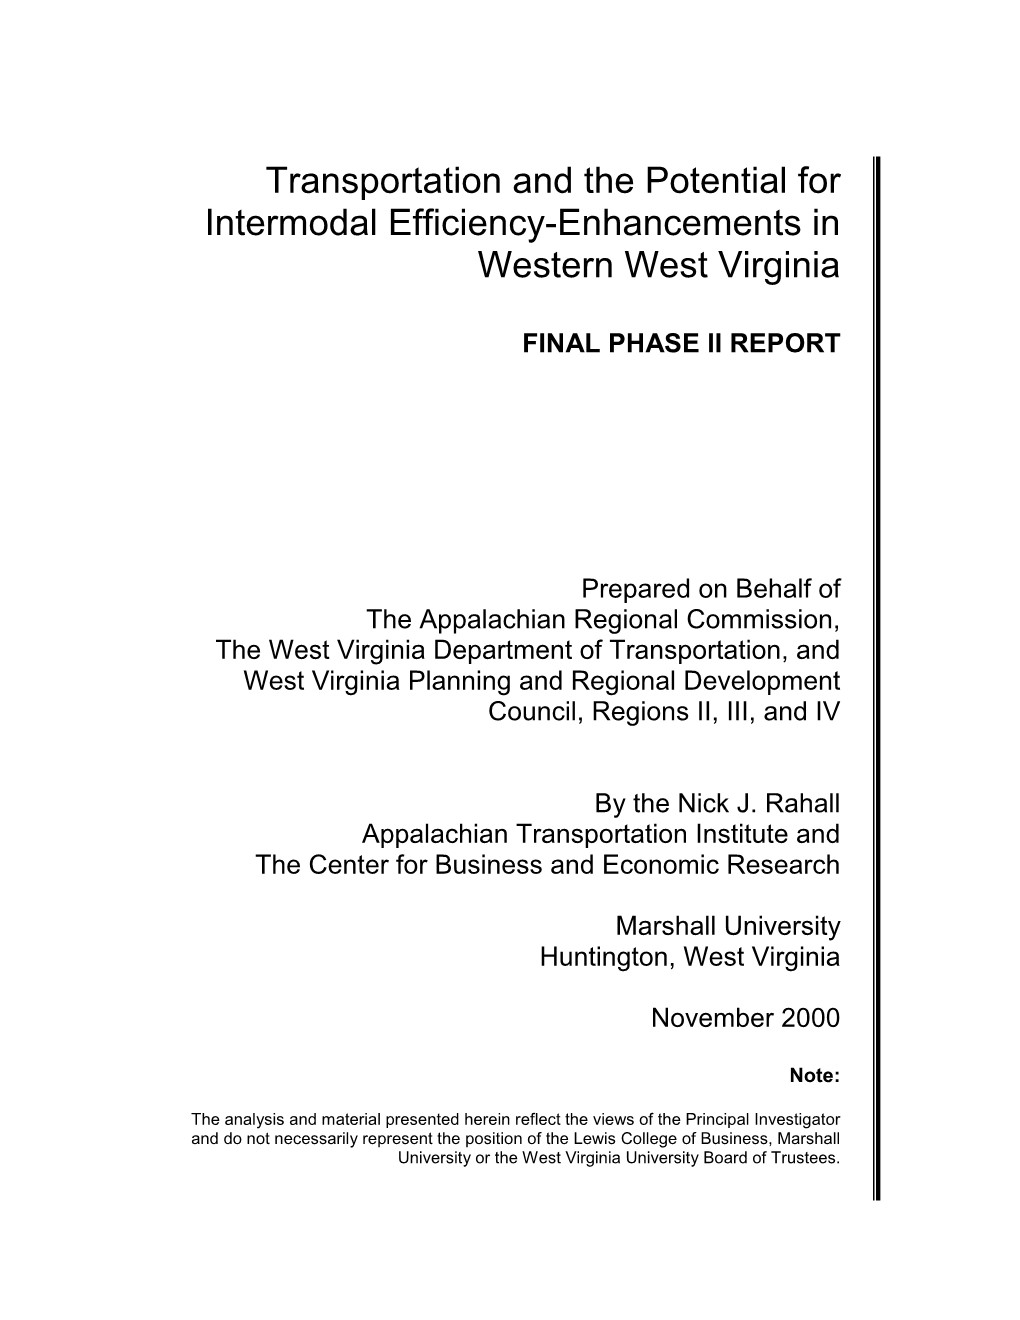 Transportation and the Potential for Intermodal Efficiency-Enhancements in Western West Virginia